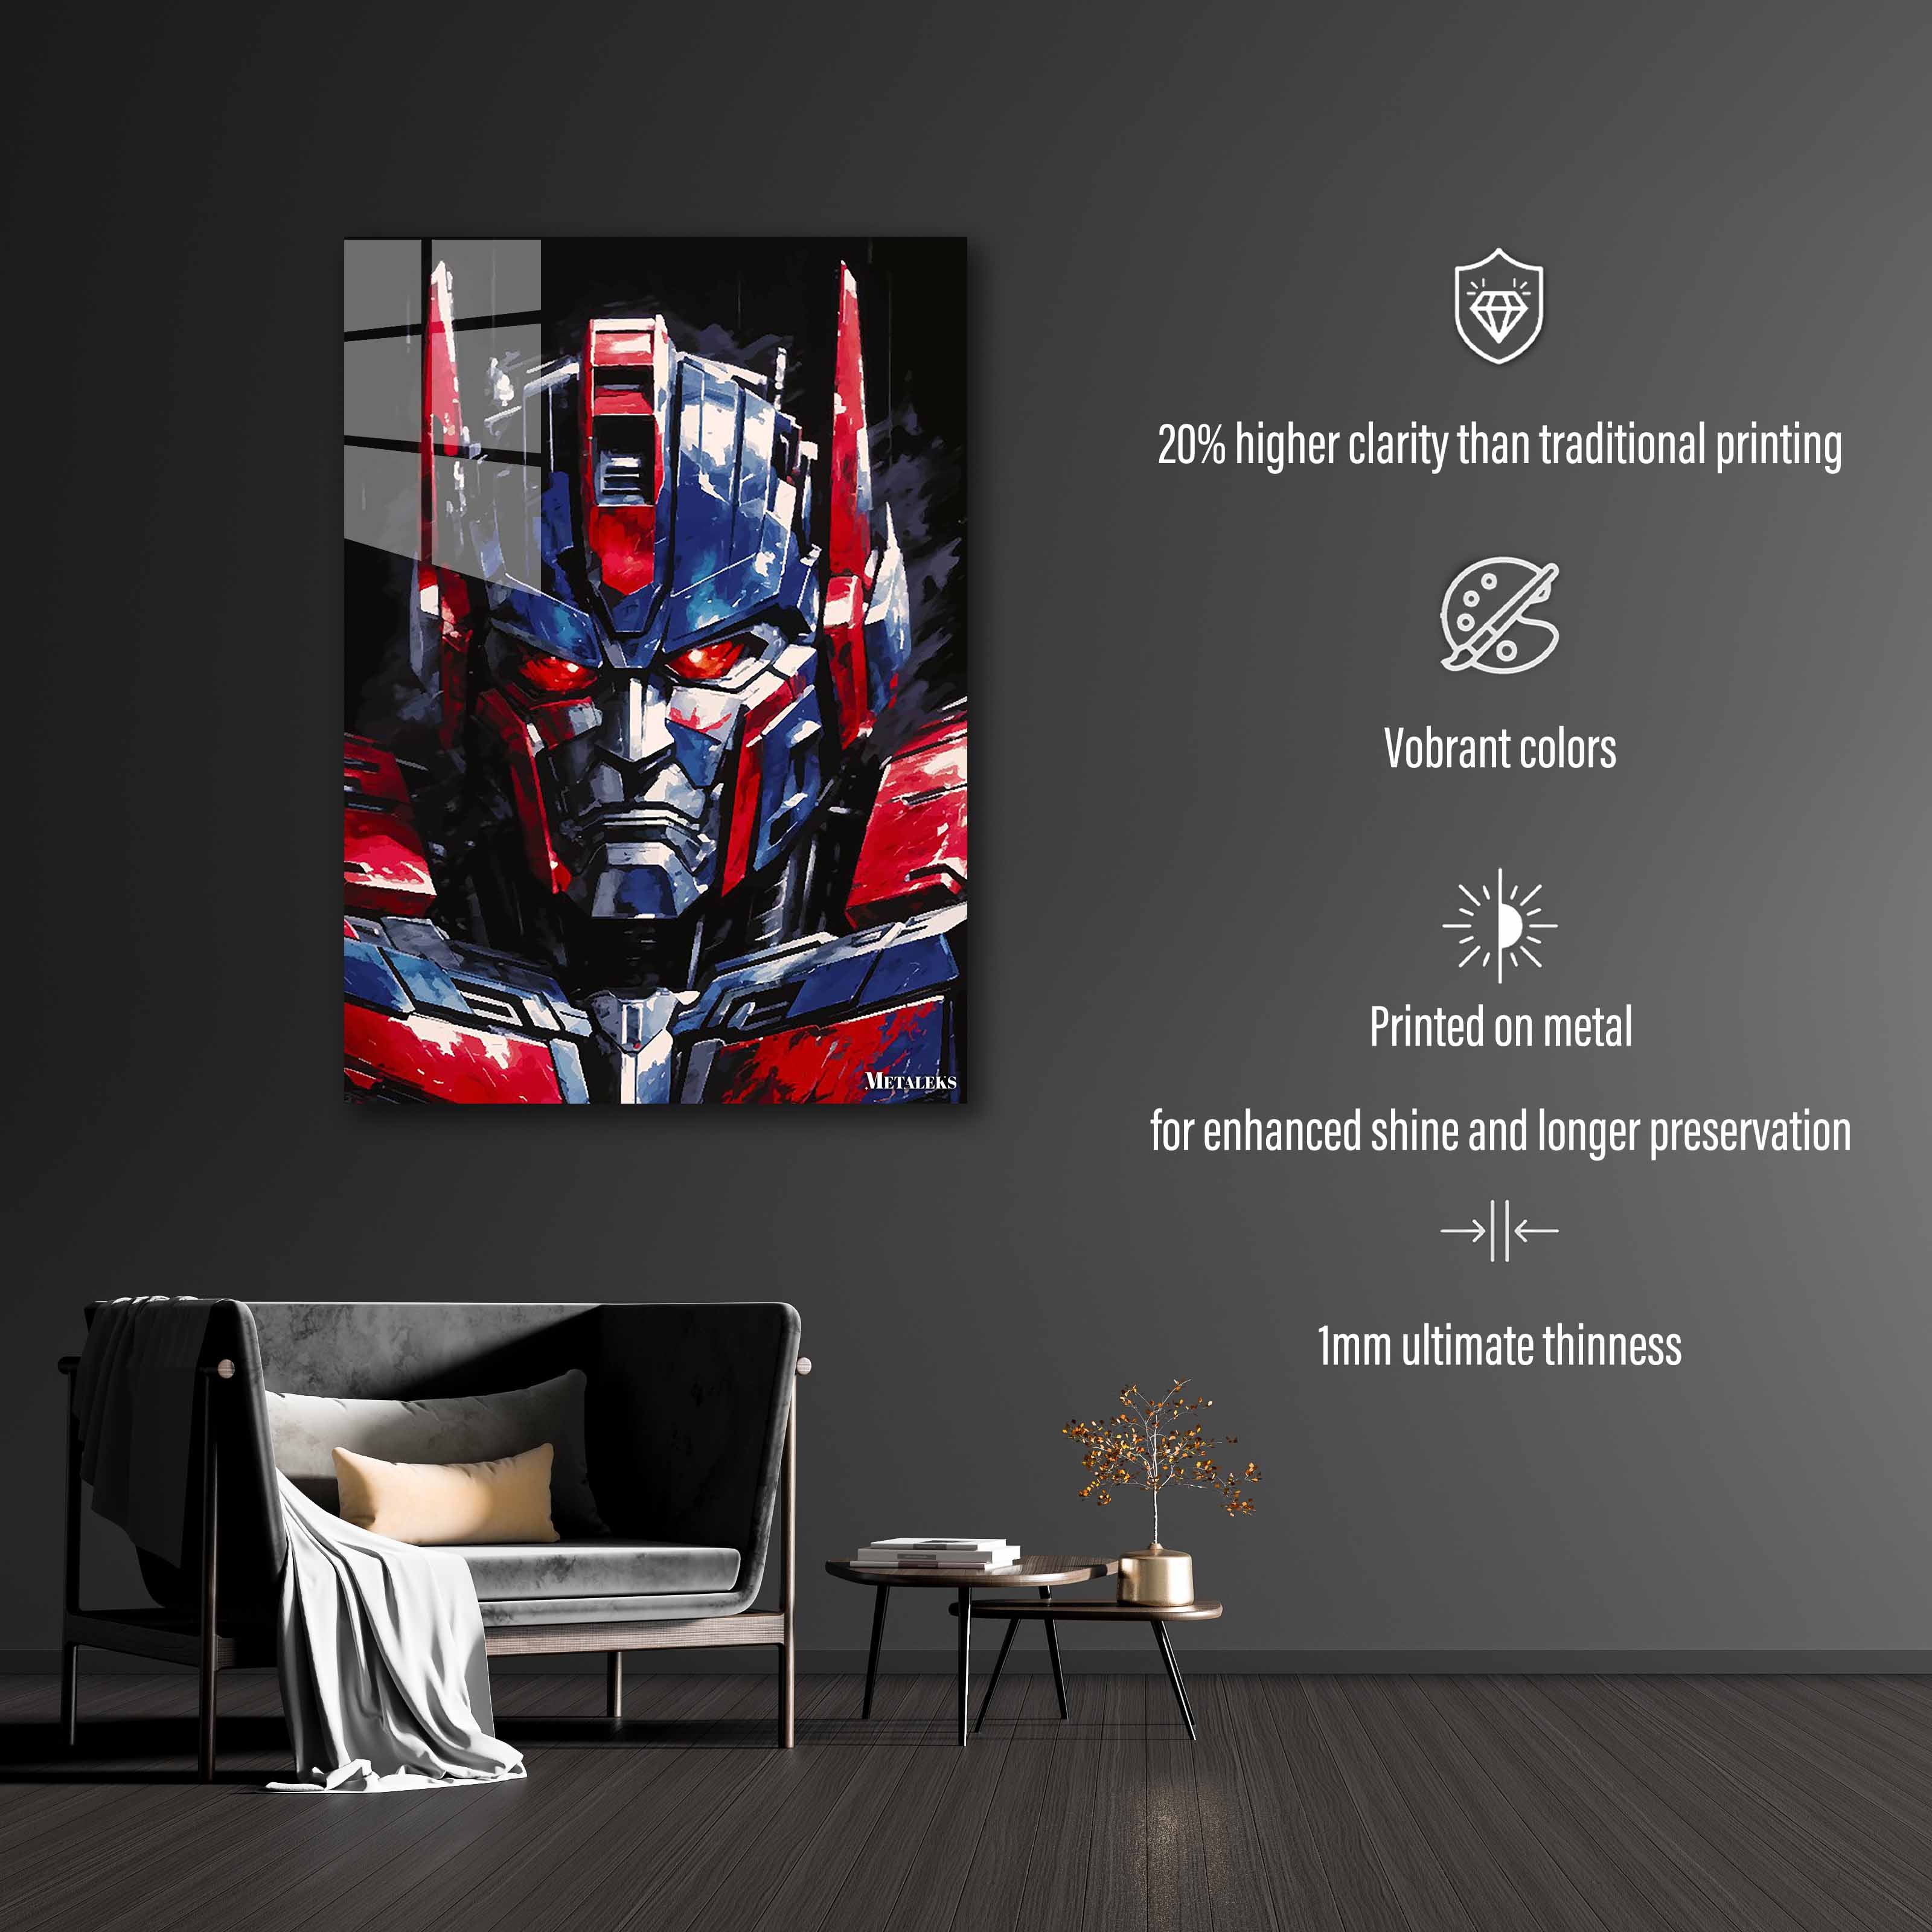 Optimus Prime 3-designed by @ALTAY